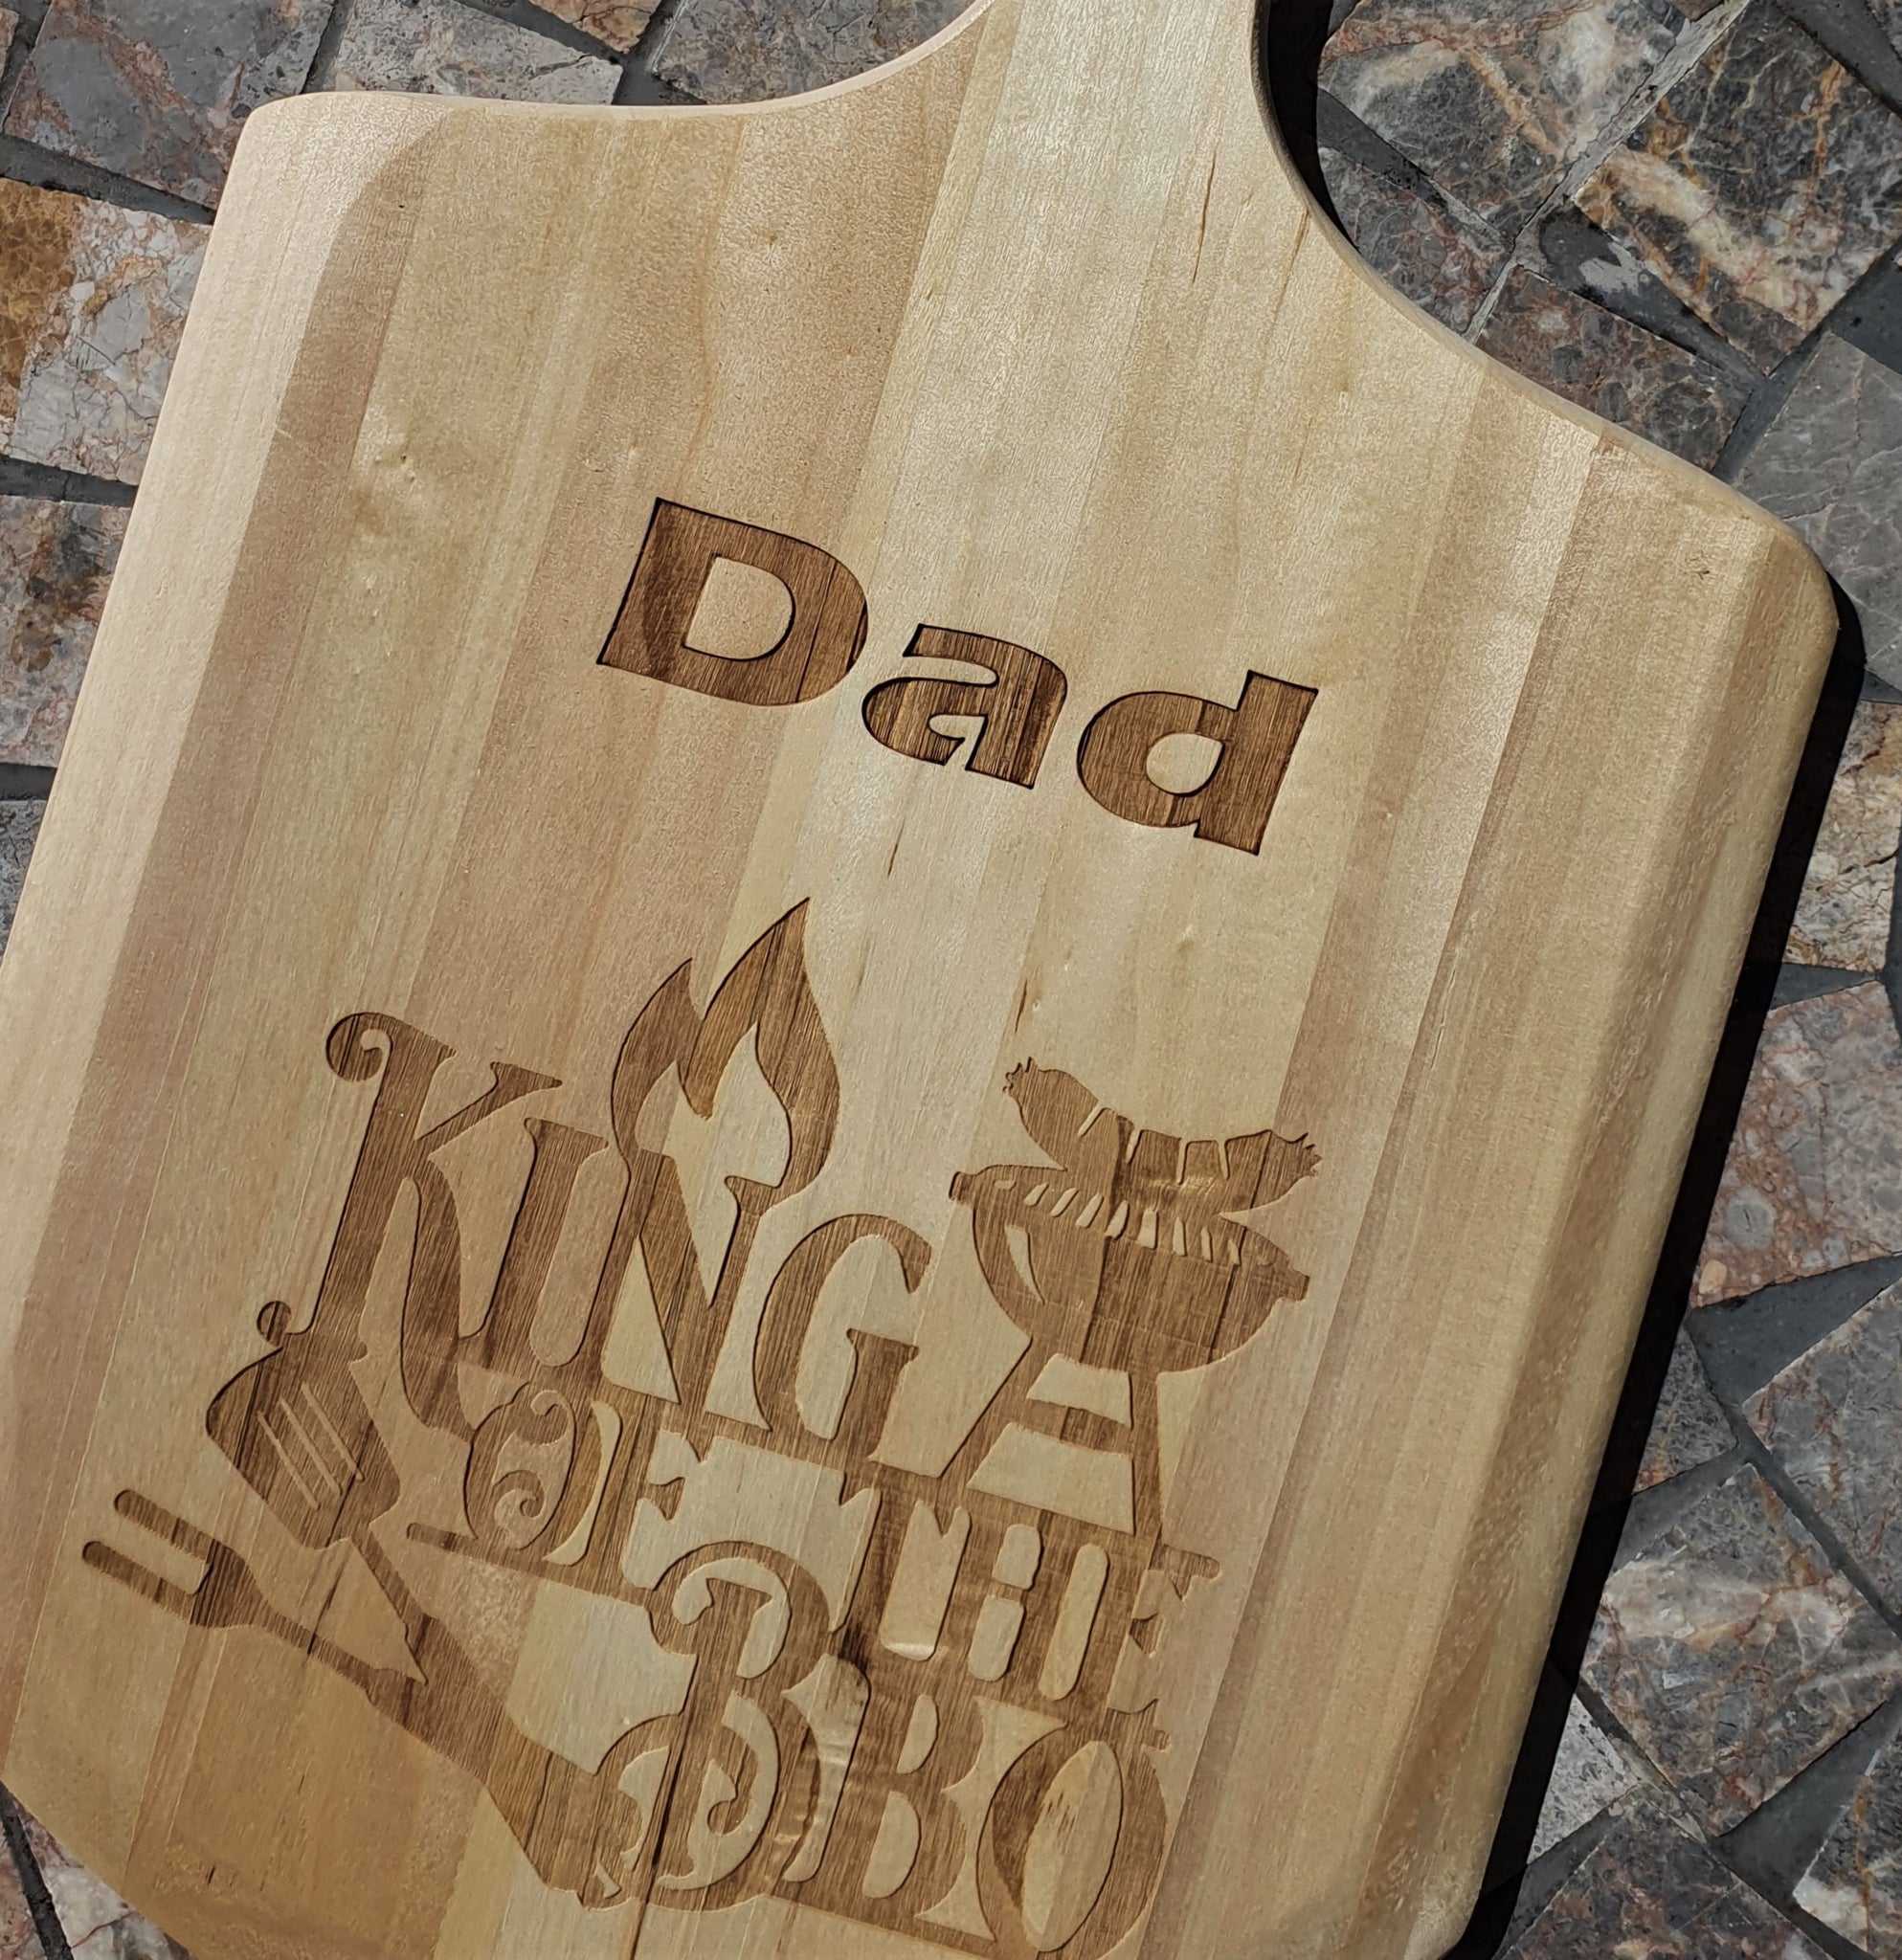 Dad - "King of the Barbeque" - serving board.